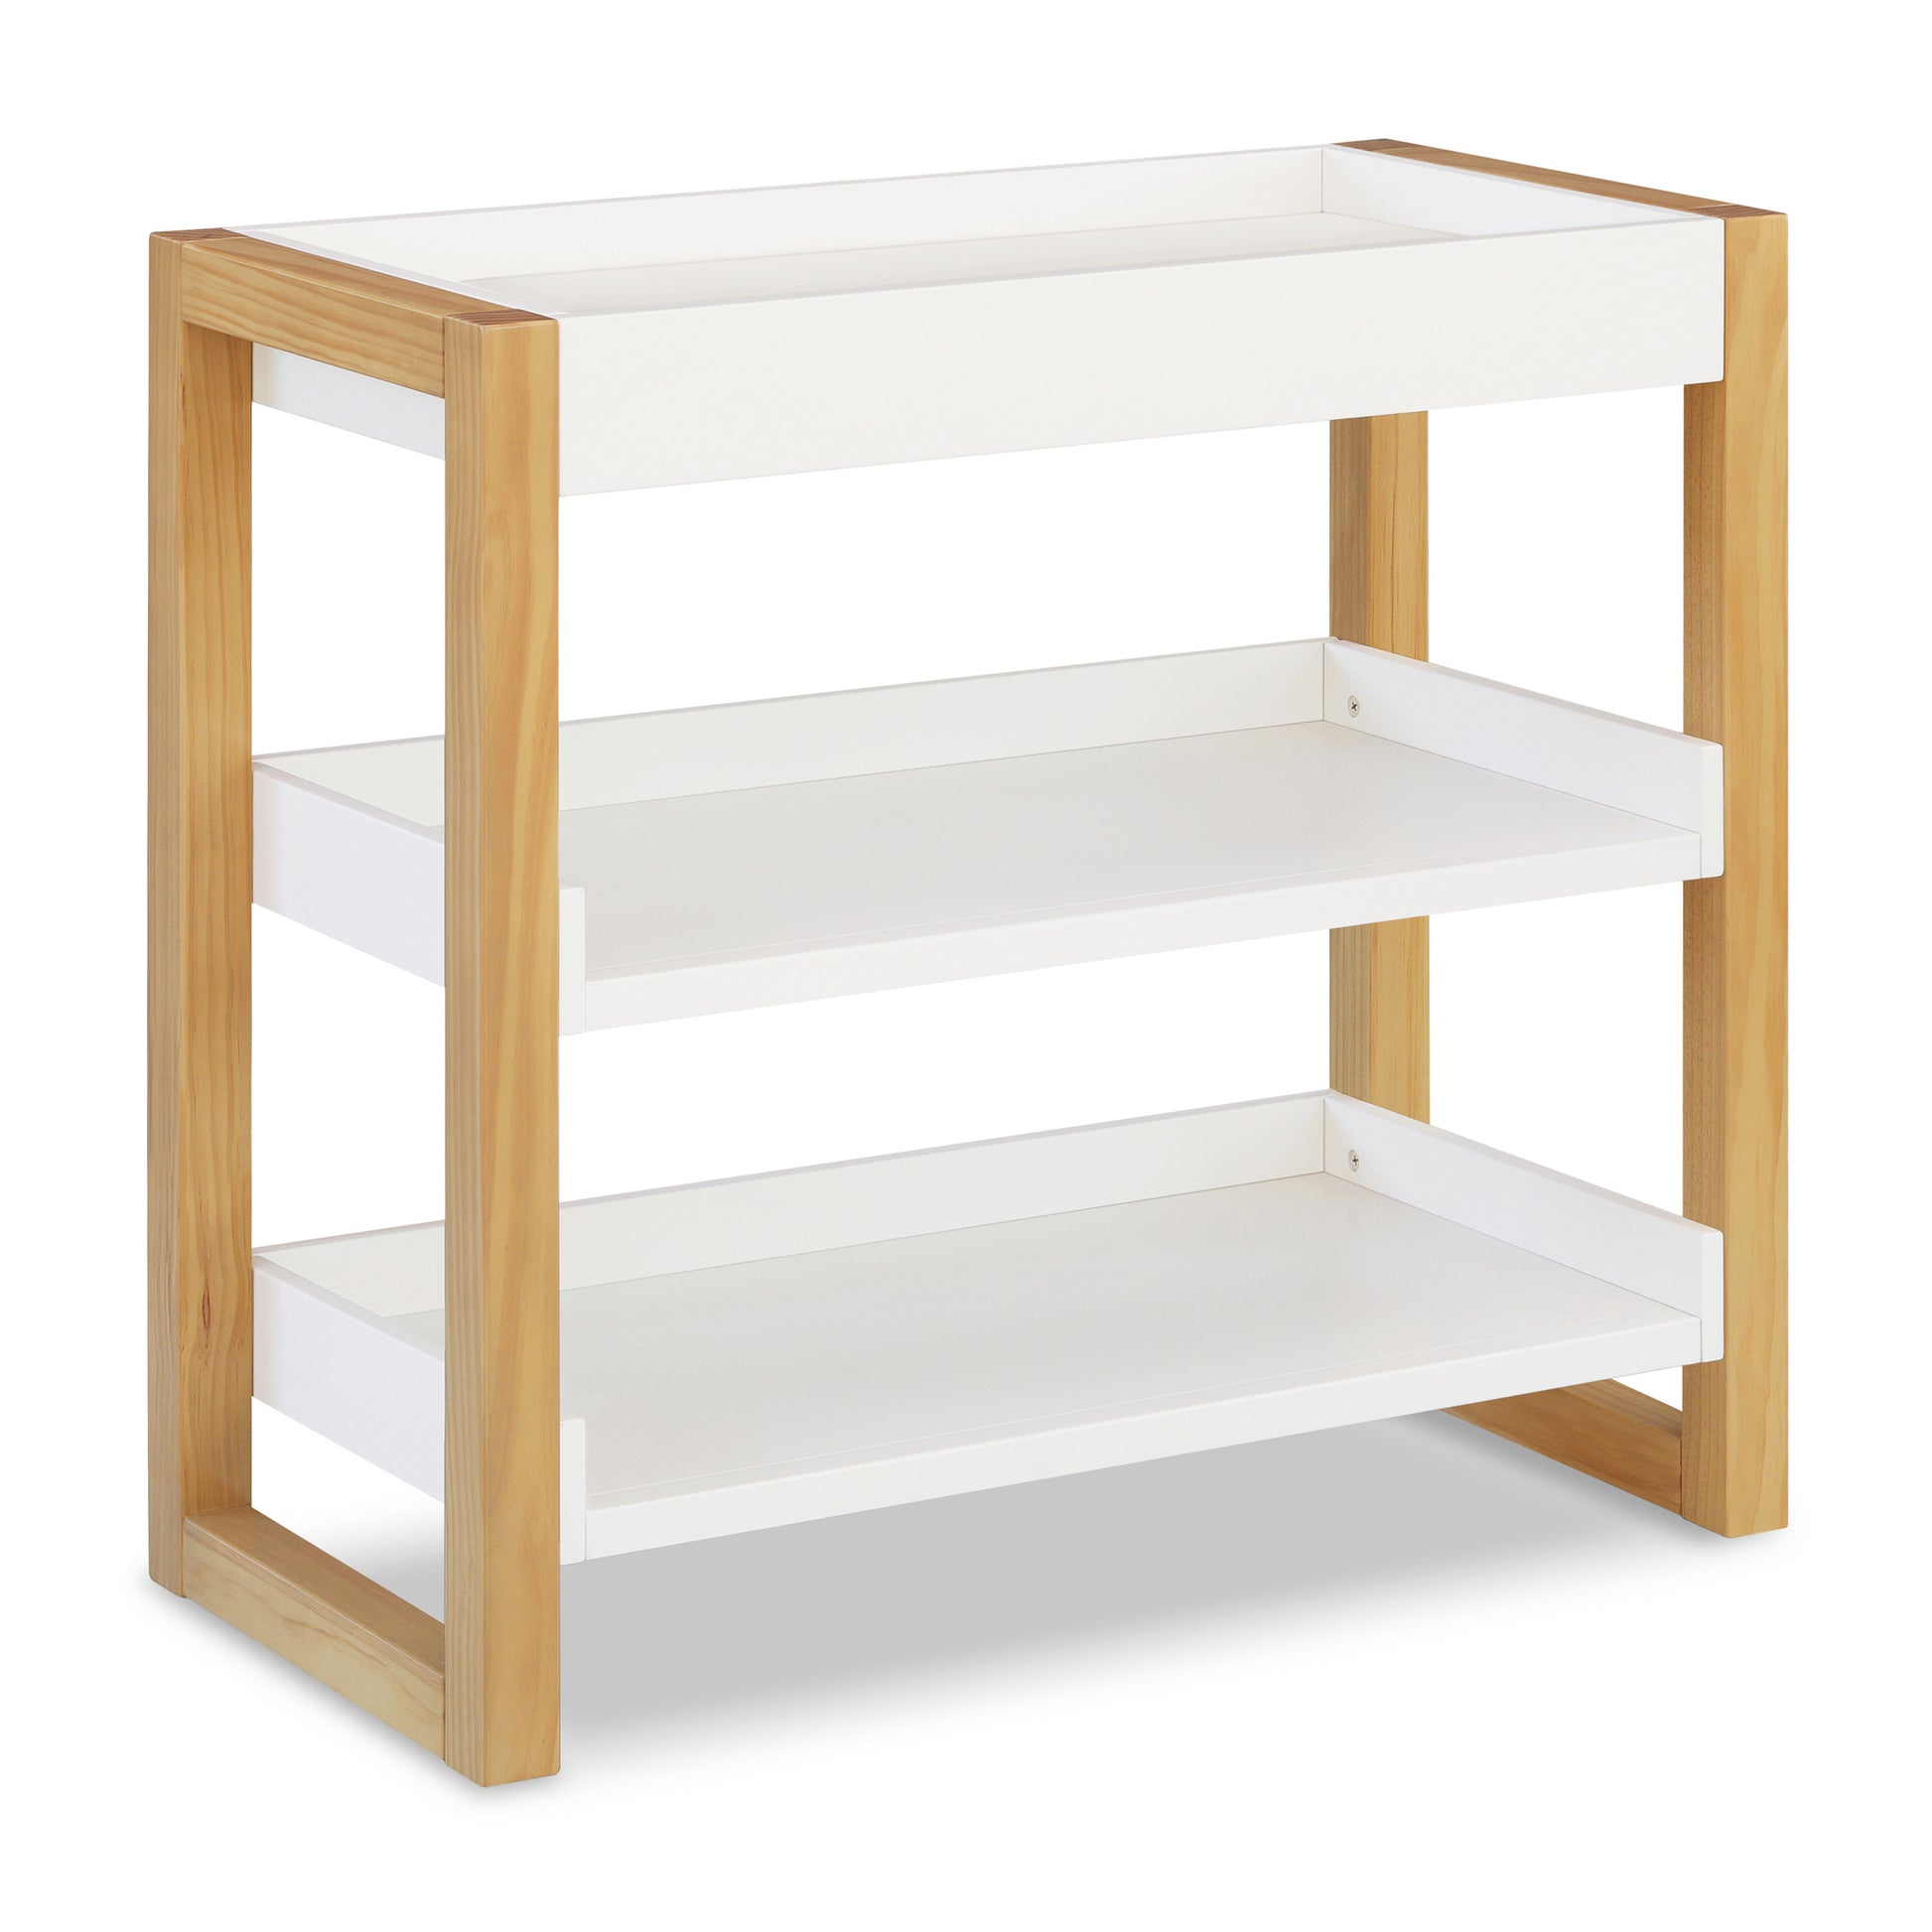 M23302RWHY,Nantucket Changing Table in Warm White/Honey